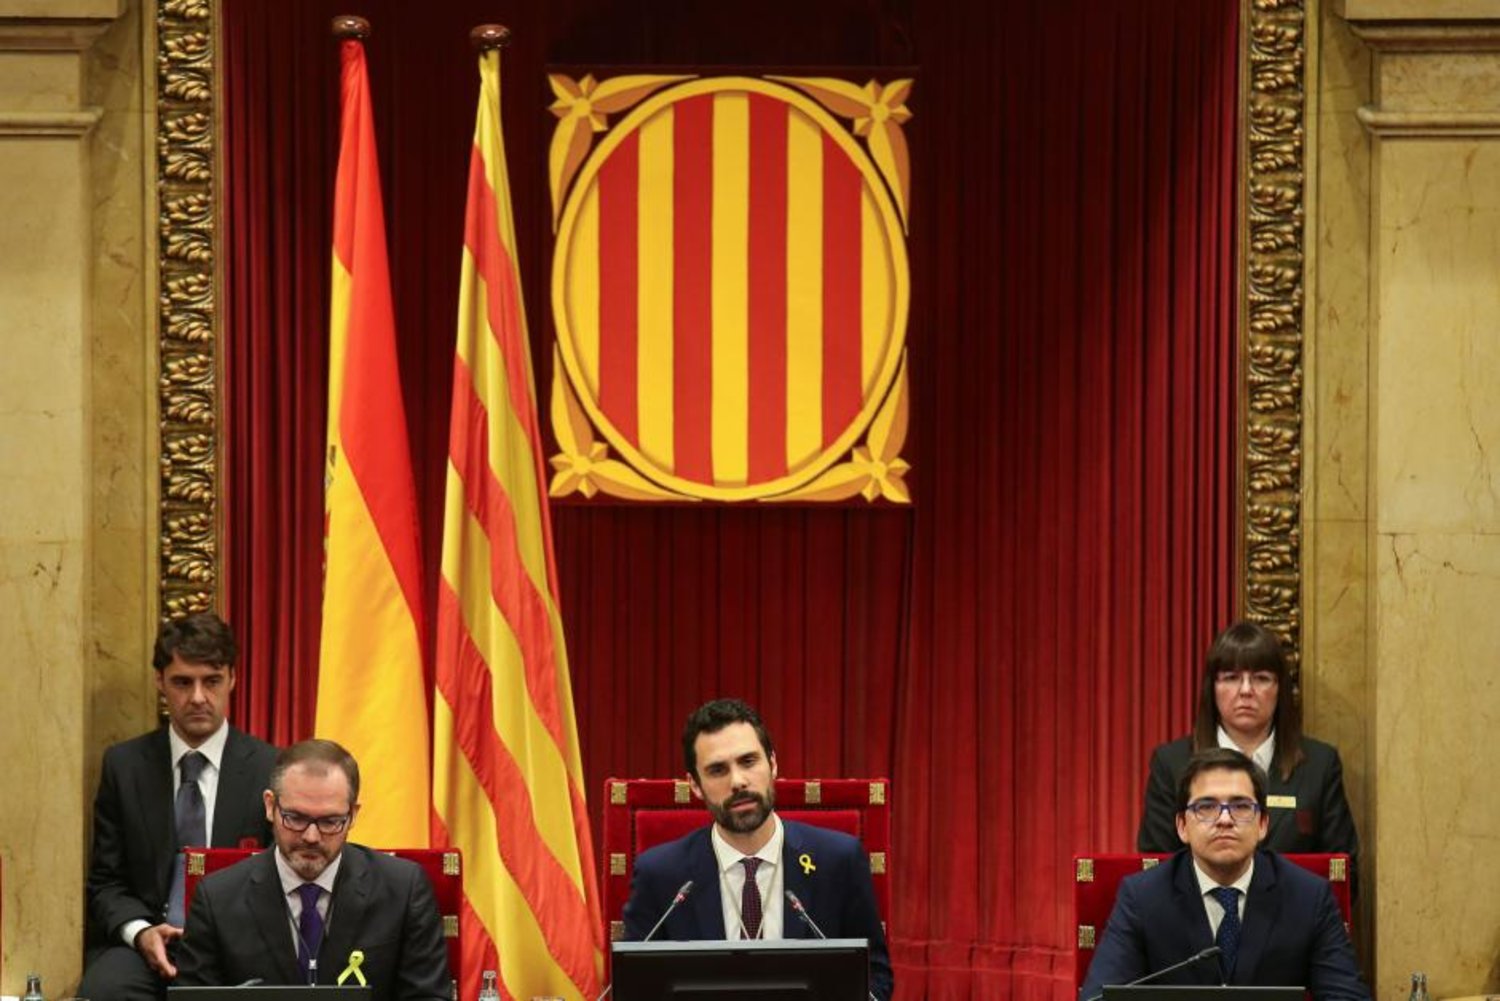 Roger Torrent, new Speaker of Catalan parliament, delivers his speech during the first session of Catalan parliament after the regional elections. (Reuters)